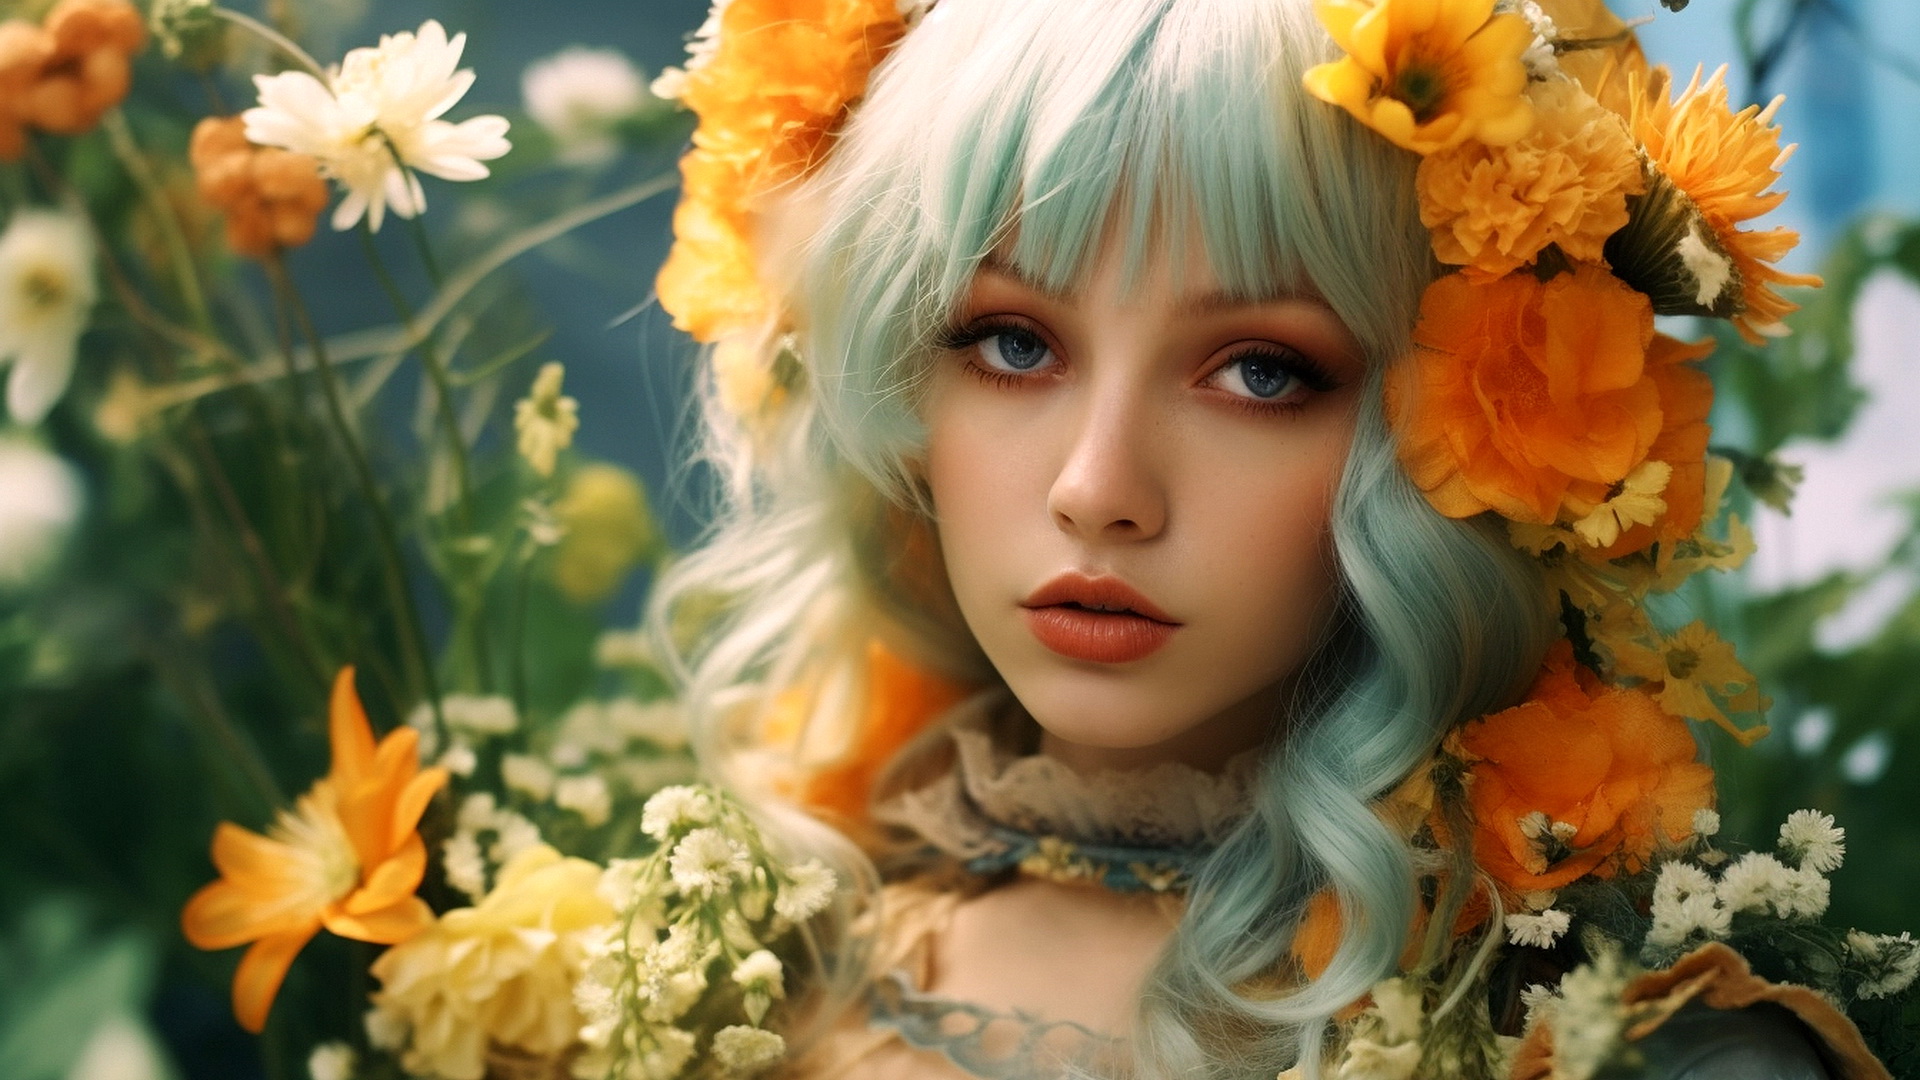 Portrait of a blonde girl and flowers